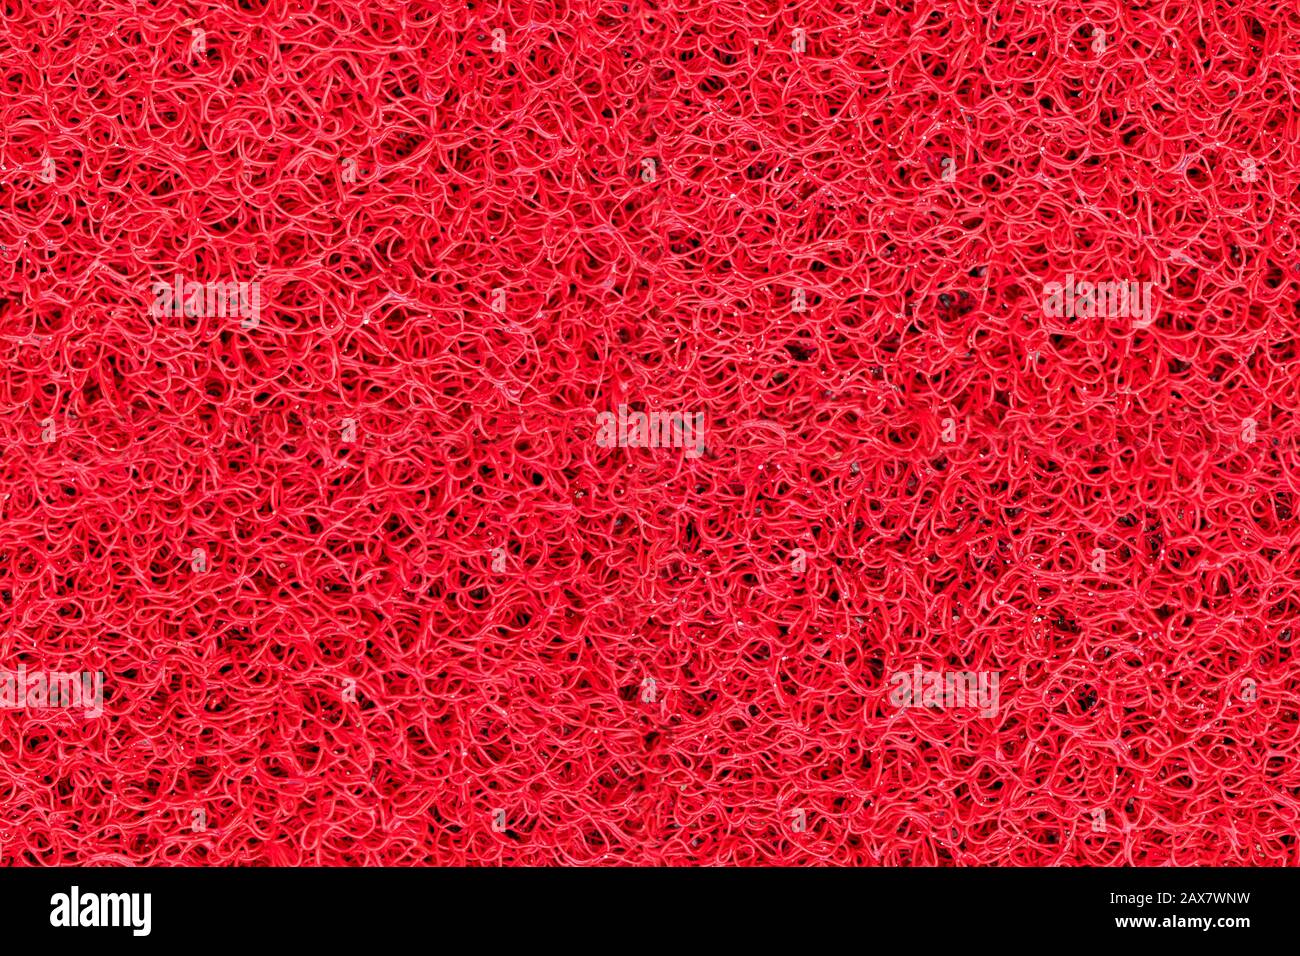 https://c8.alamy.com/comp/2AX7WNW/close-up-detail-bright-red-plastic-doormat-seamless-texture-neutral-abstract-backdrop-surface-2AX7WNW.jpg